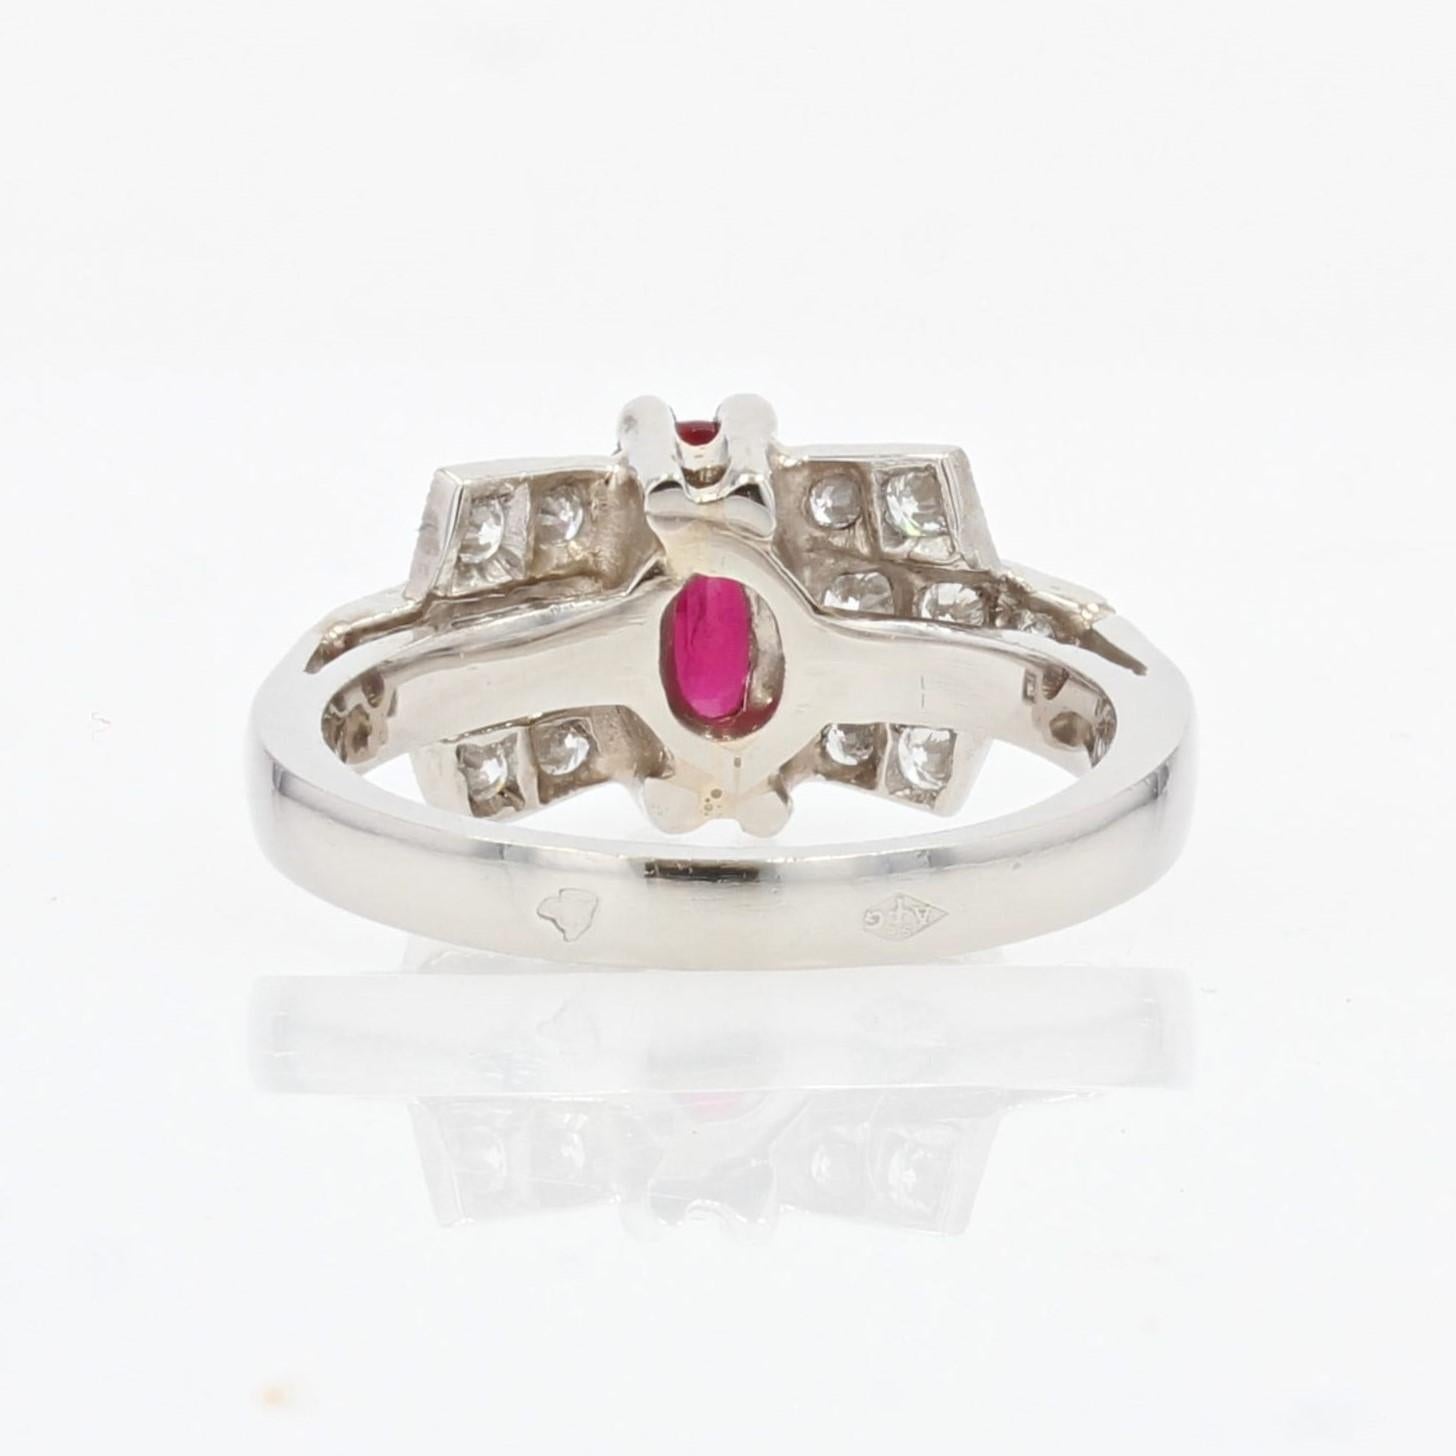 French Modern Art Deco Style Ruby Diamonds Platinum Ring For Sale 7